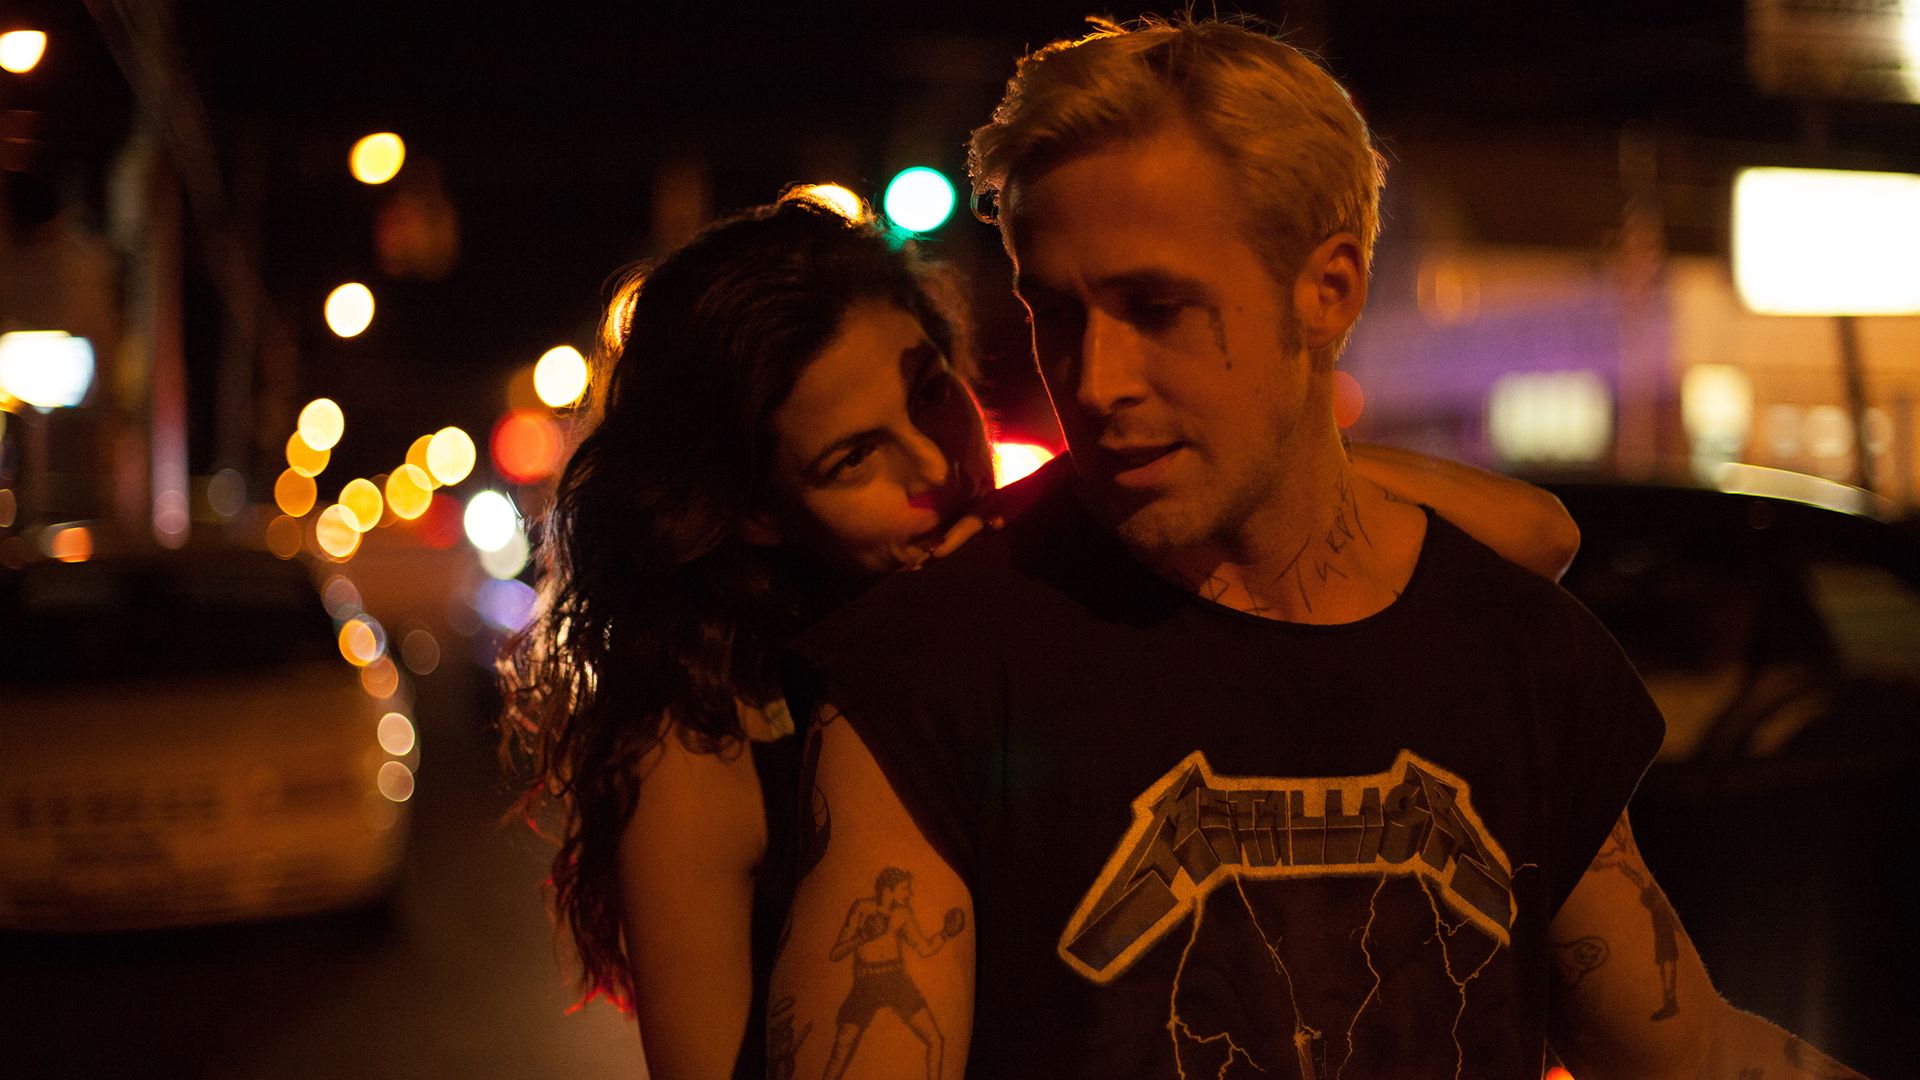 Ryan stars with Eva Mendes in The Place Beyond The Pines